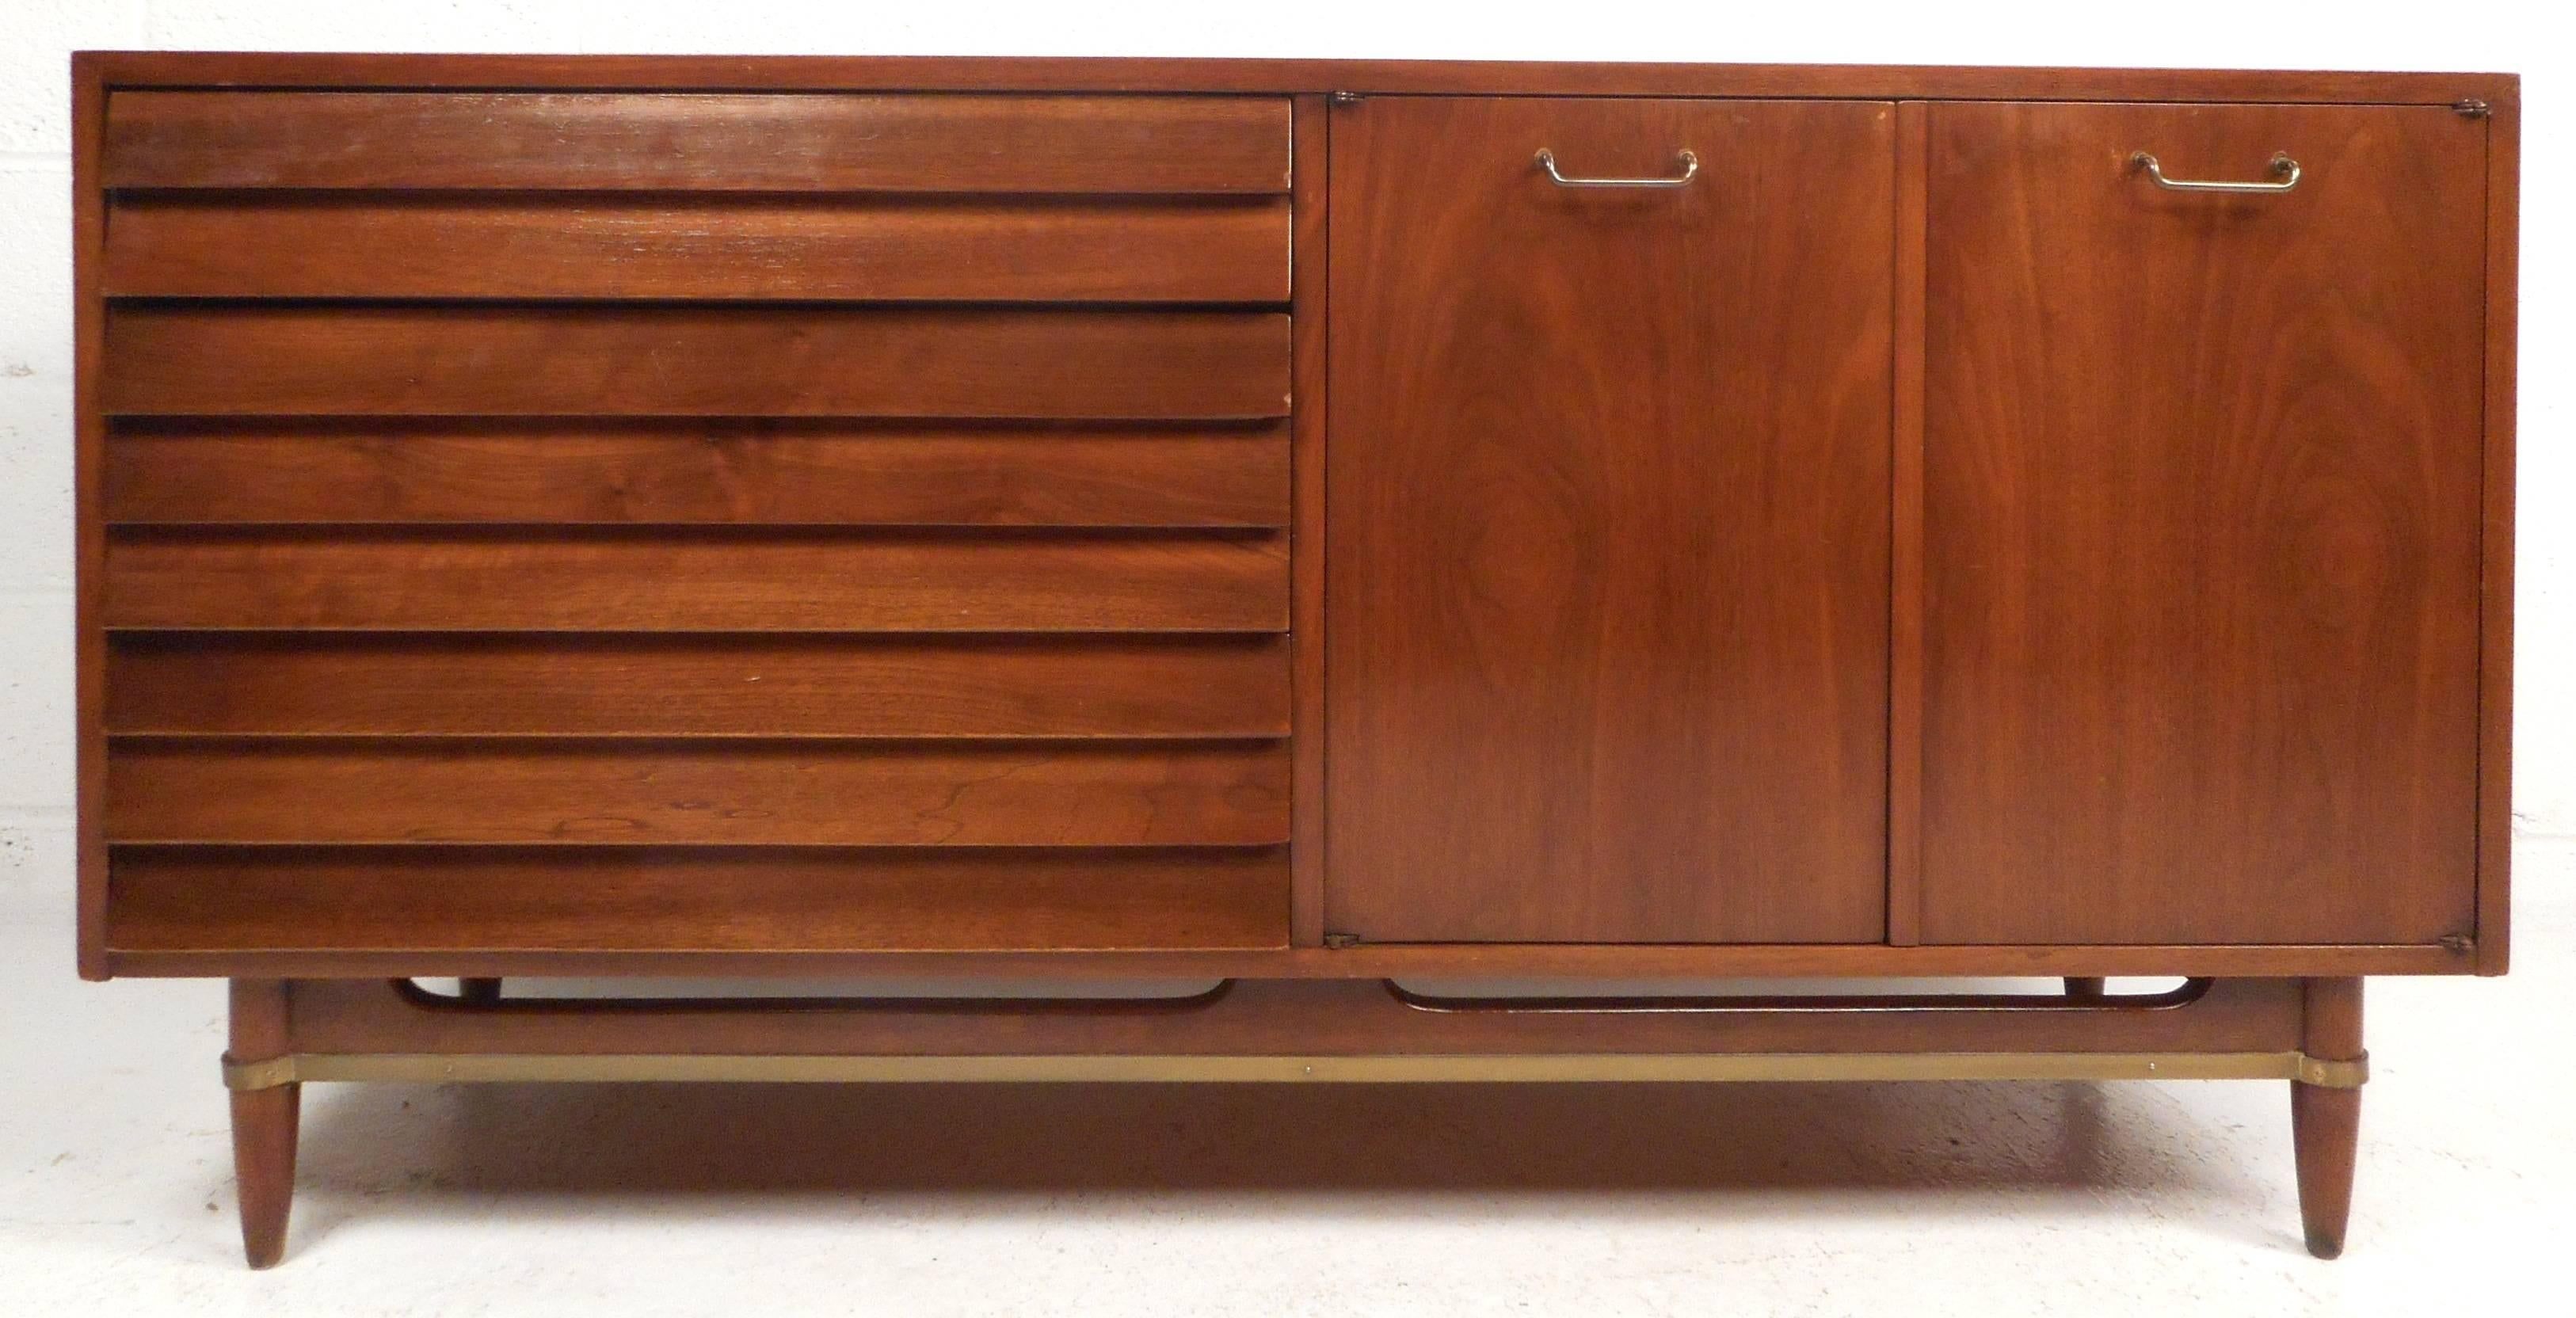 This elegant vintage modern credenza features three large drawers with louvered fronts and three smaller drawers along with a shelf hidden by cabinet doors. Sleek design with unique brass pulls, a brass stretcher, and a sculpted base. Beautiful